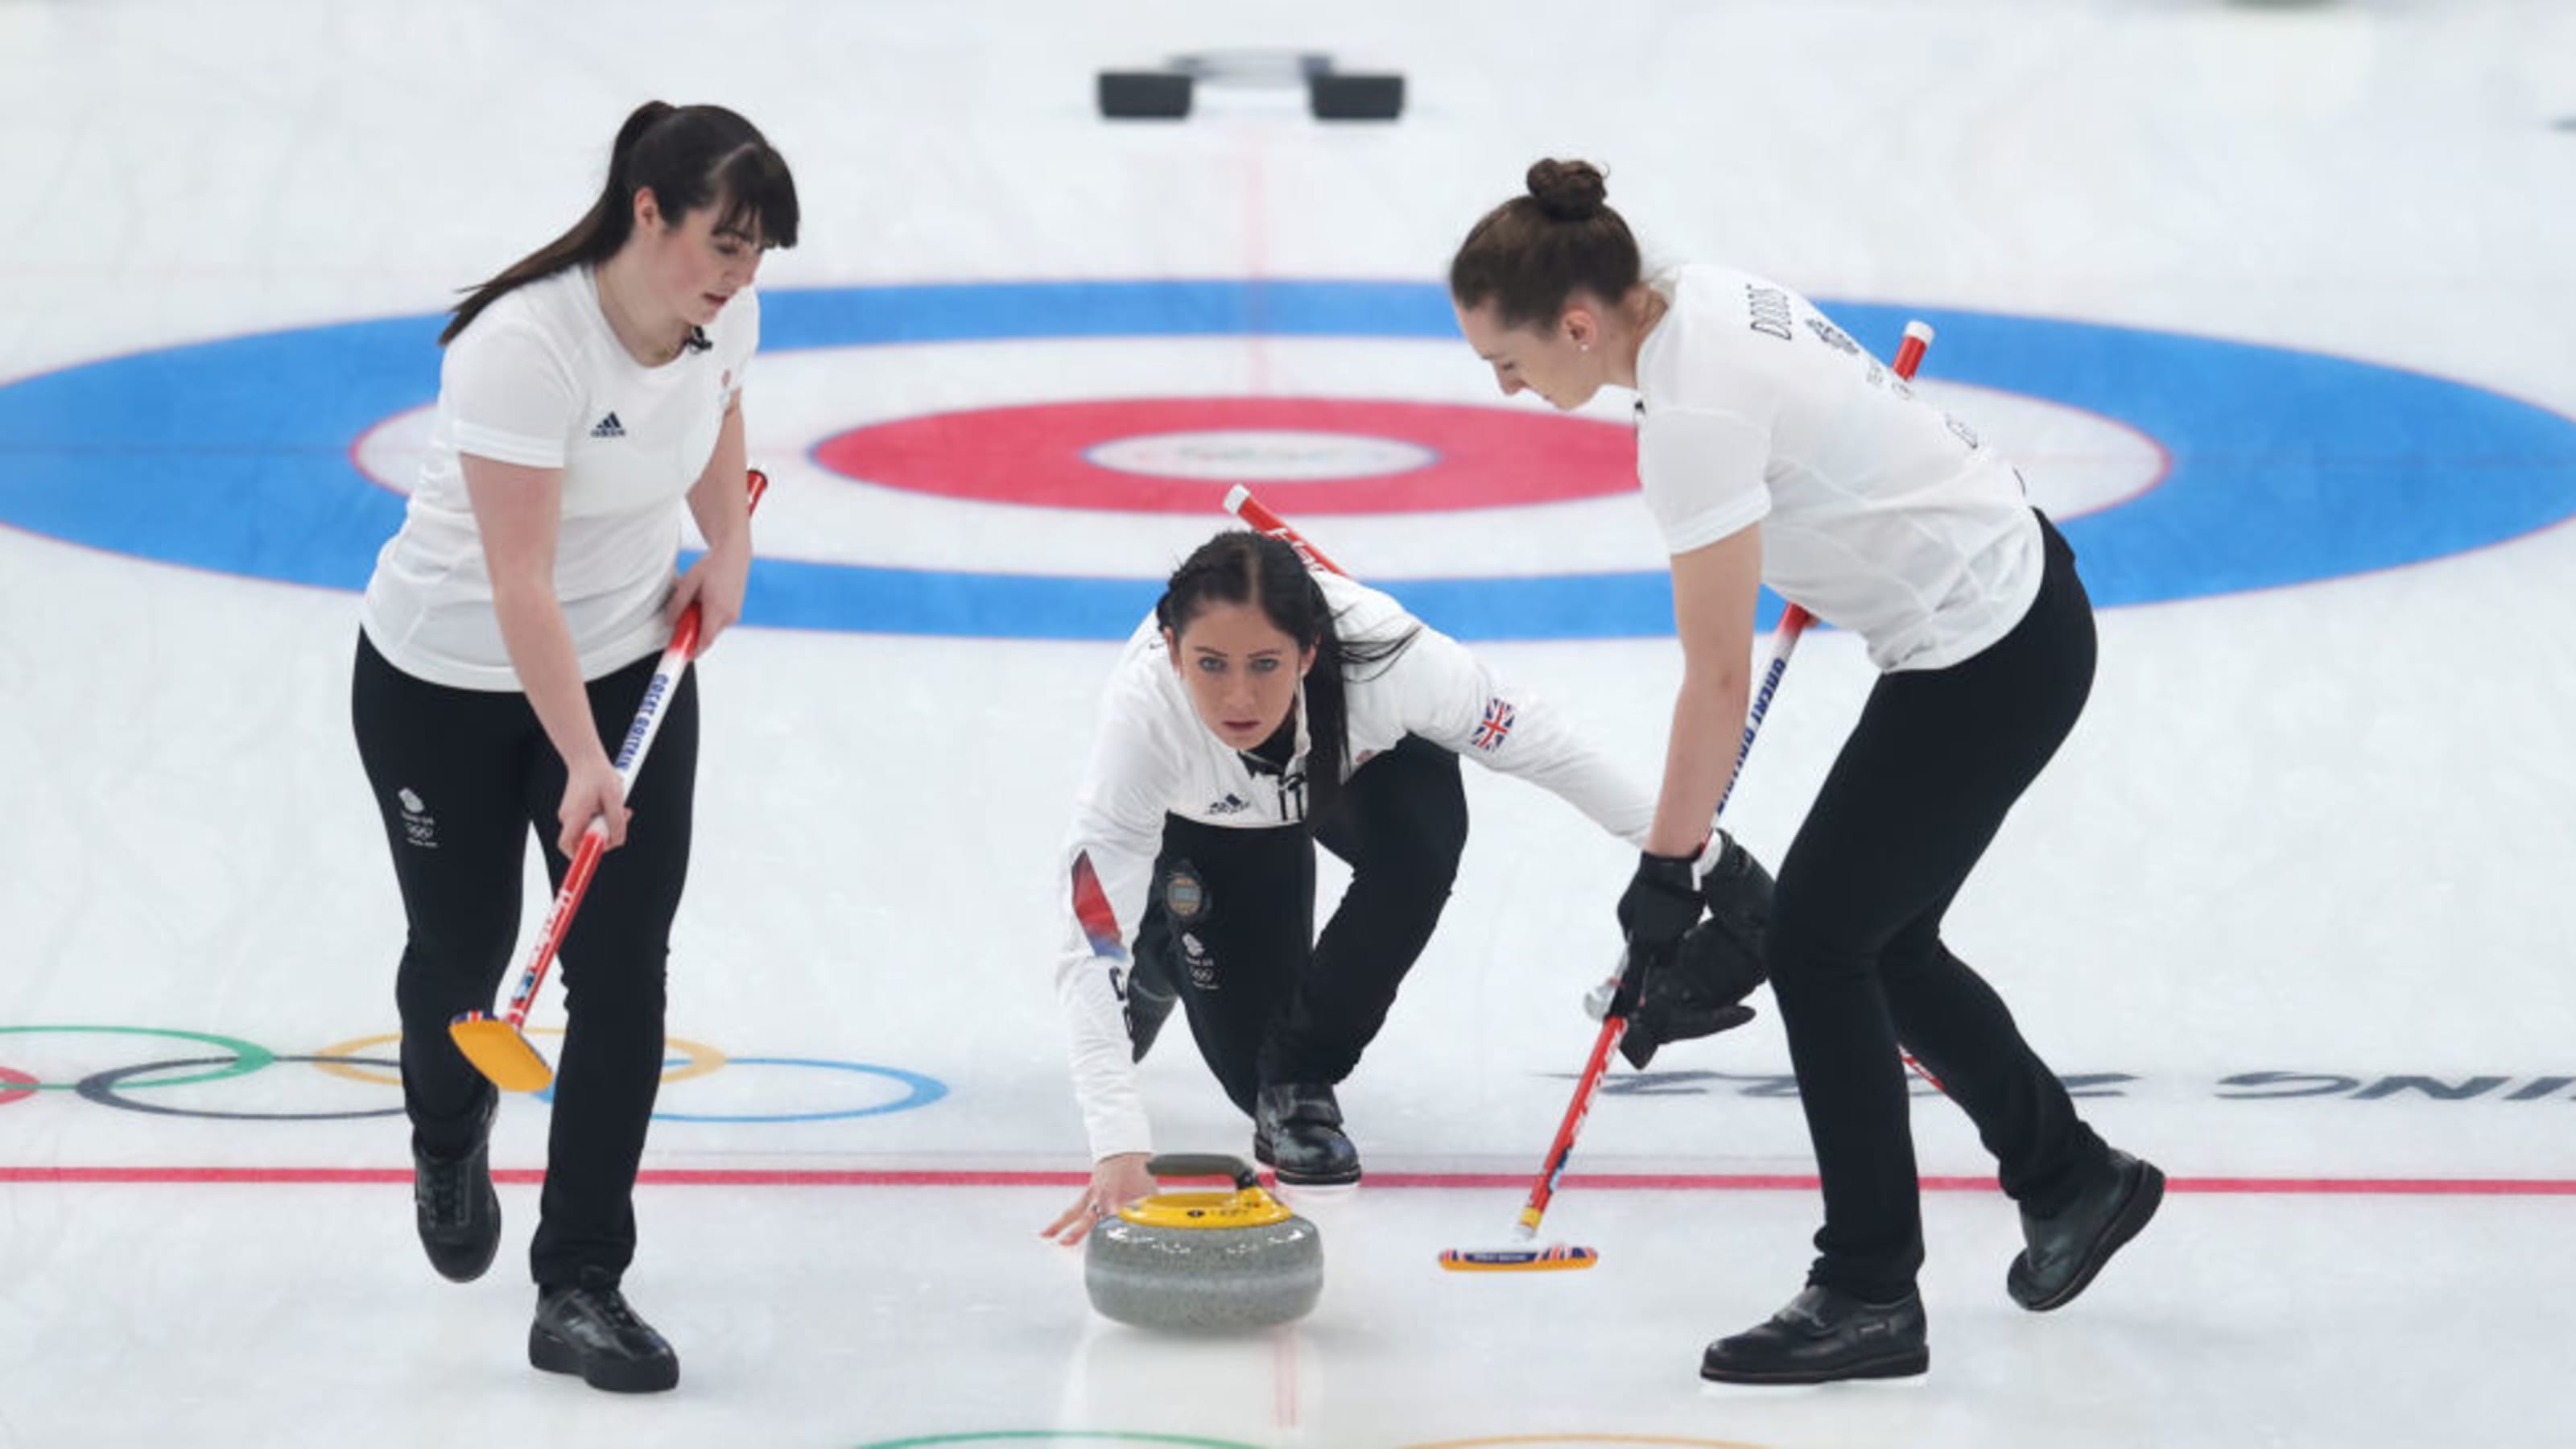 Curling (Scotland, many countries in the world)